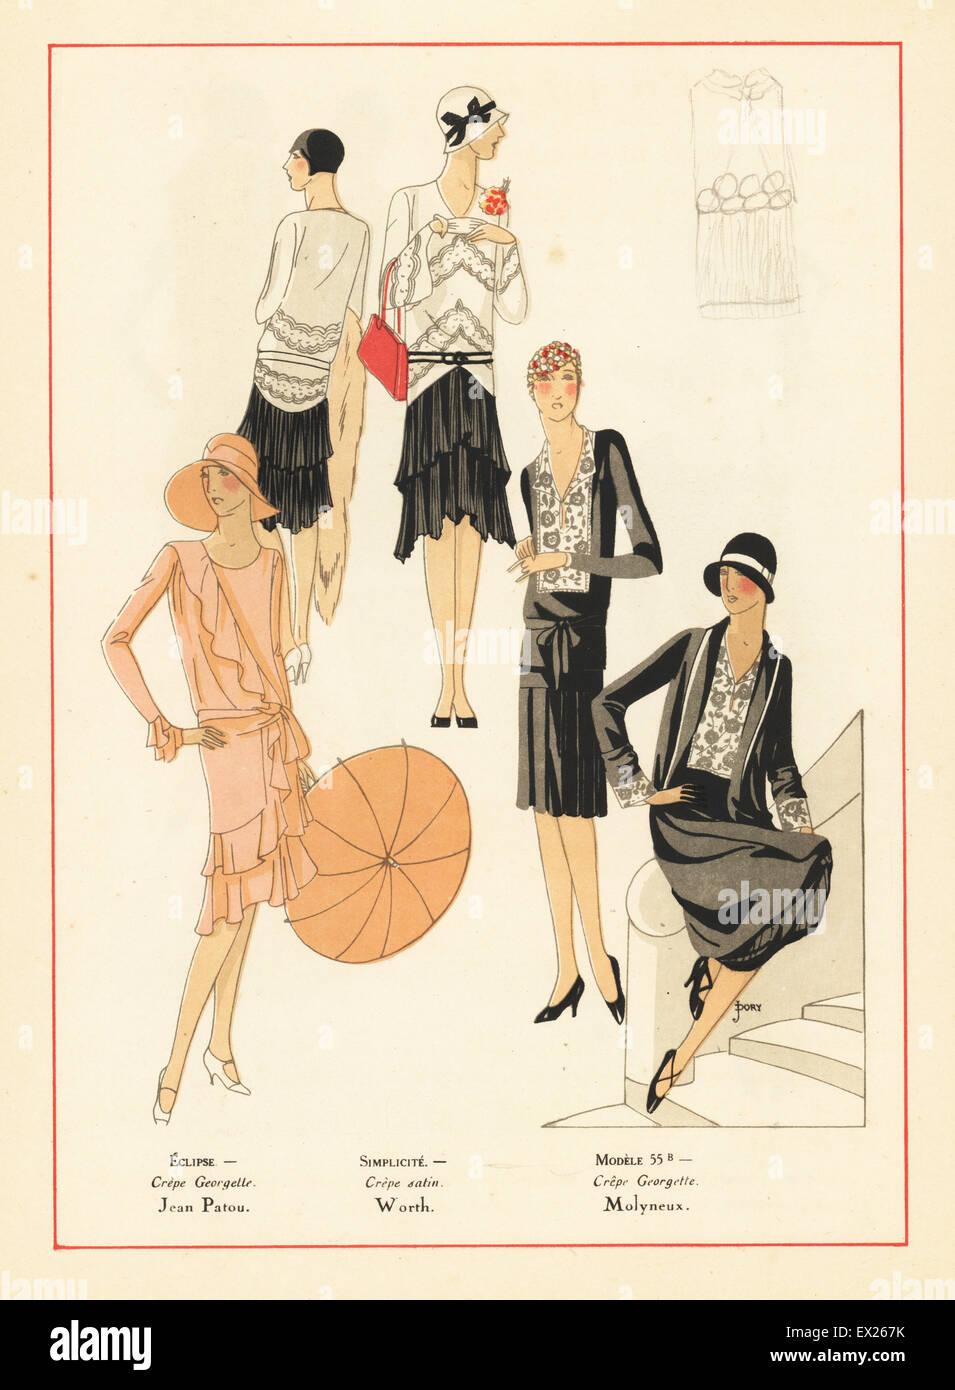 Women in evening dresses of crepe georgette and satin crepe, 1928. Lithograph with pochoir (stencil) handcolour after an illustration by J. Dory from the luxury fashion magazine Art, Gout, Beaute, Paris, 1928. Stock Photo